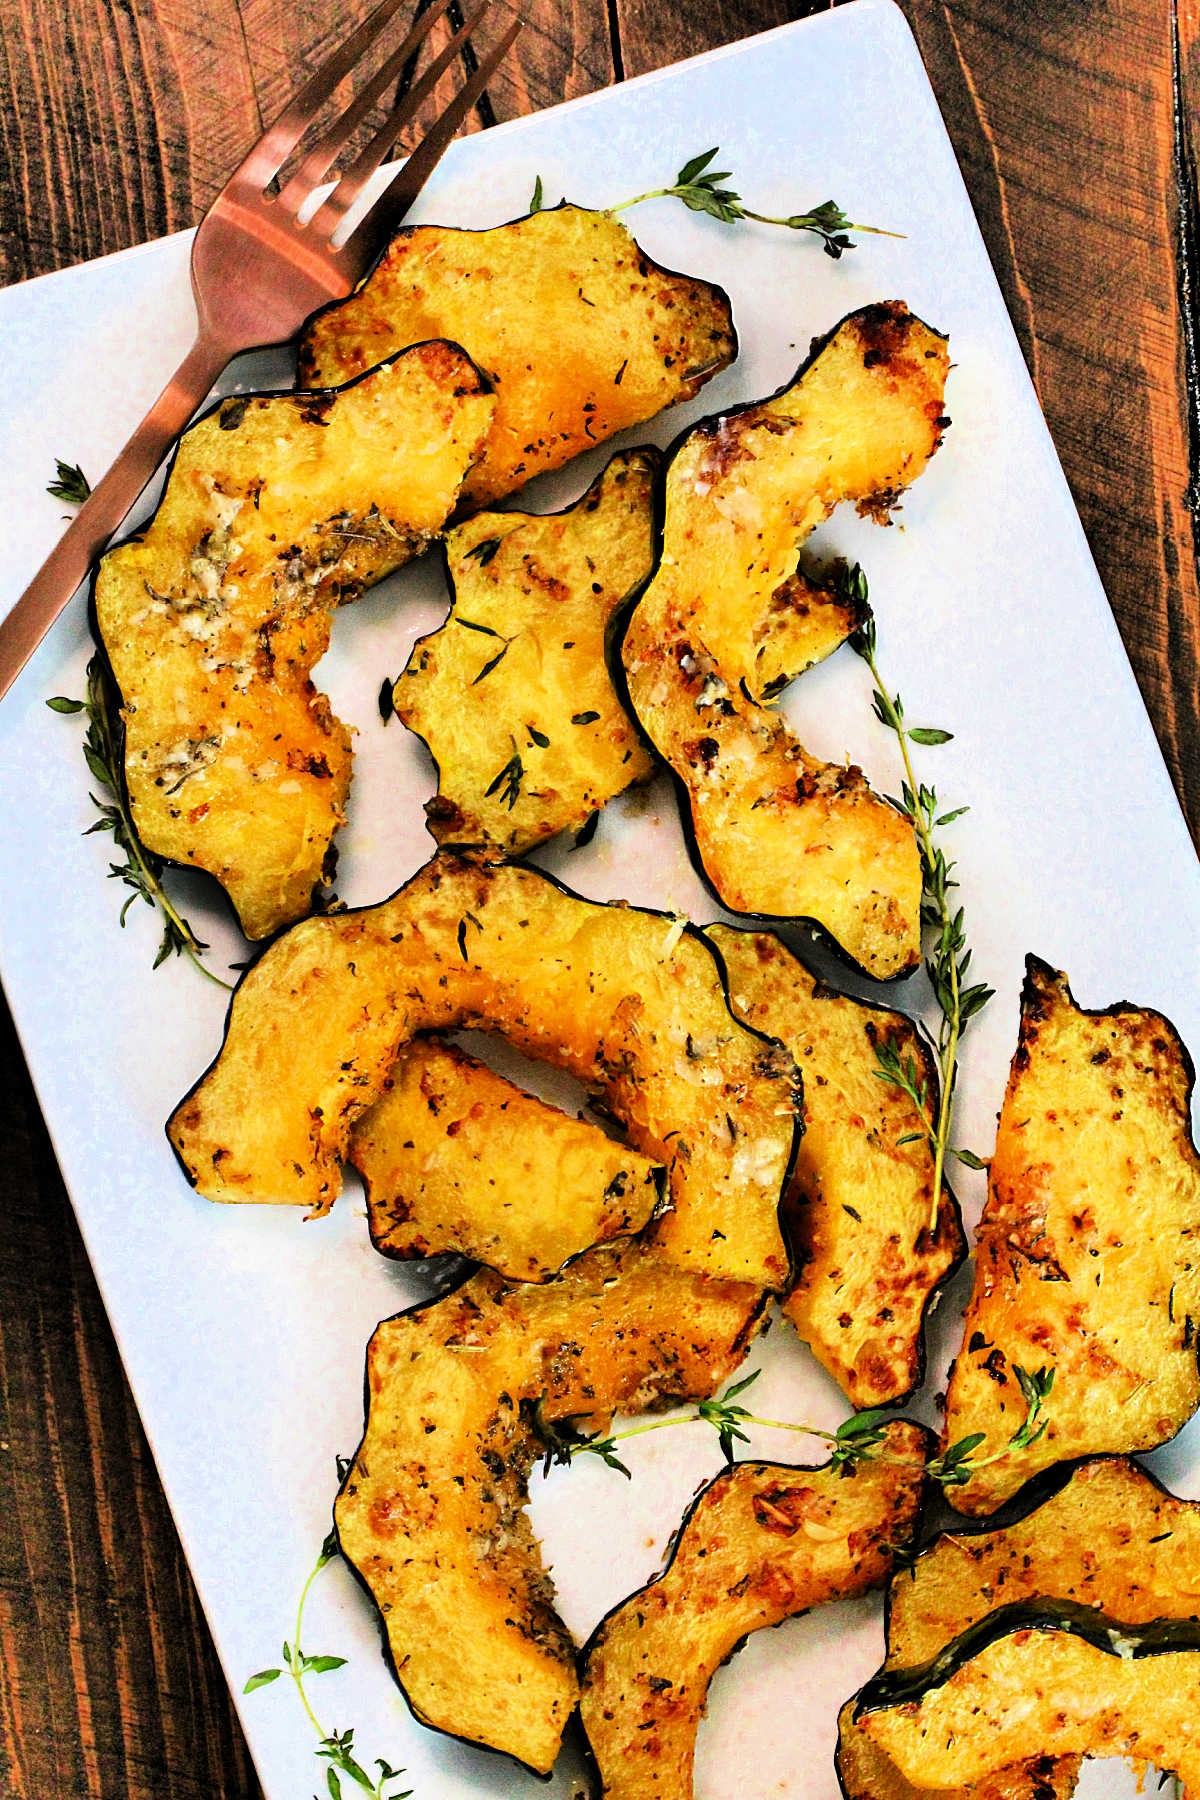 Slices of air fryer acorn squash garnished with fresh thyme on a white platter with a bronze fork.